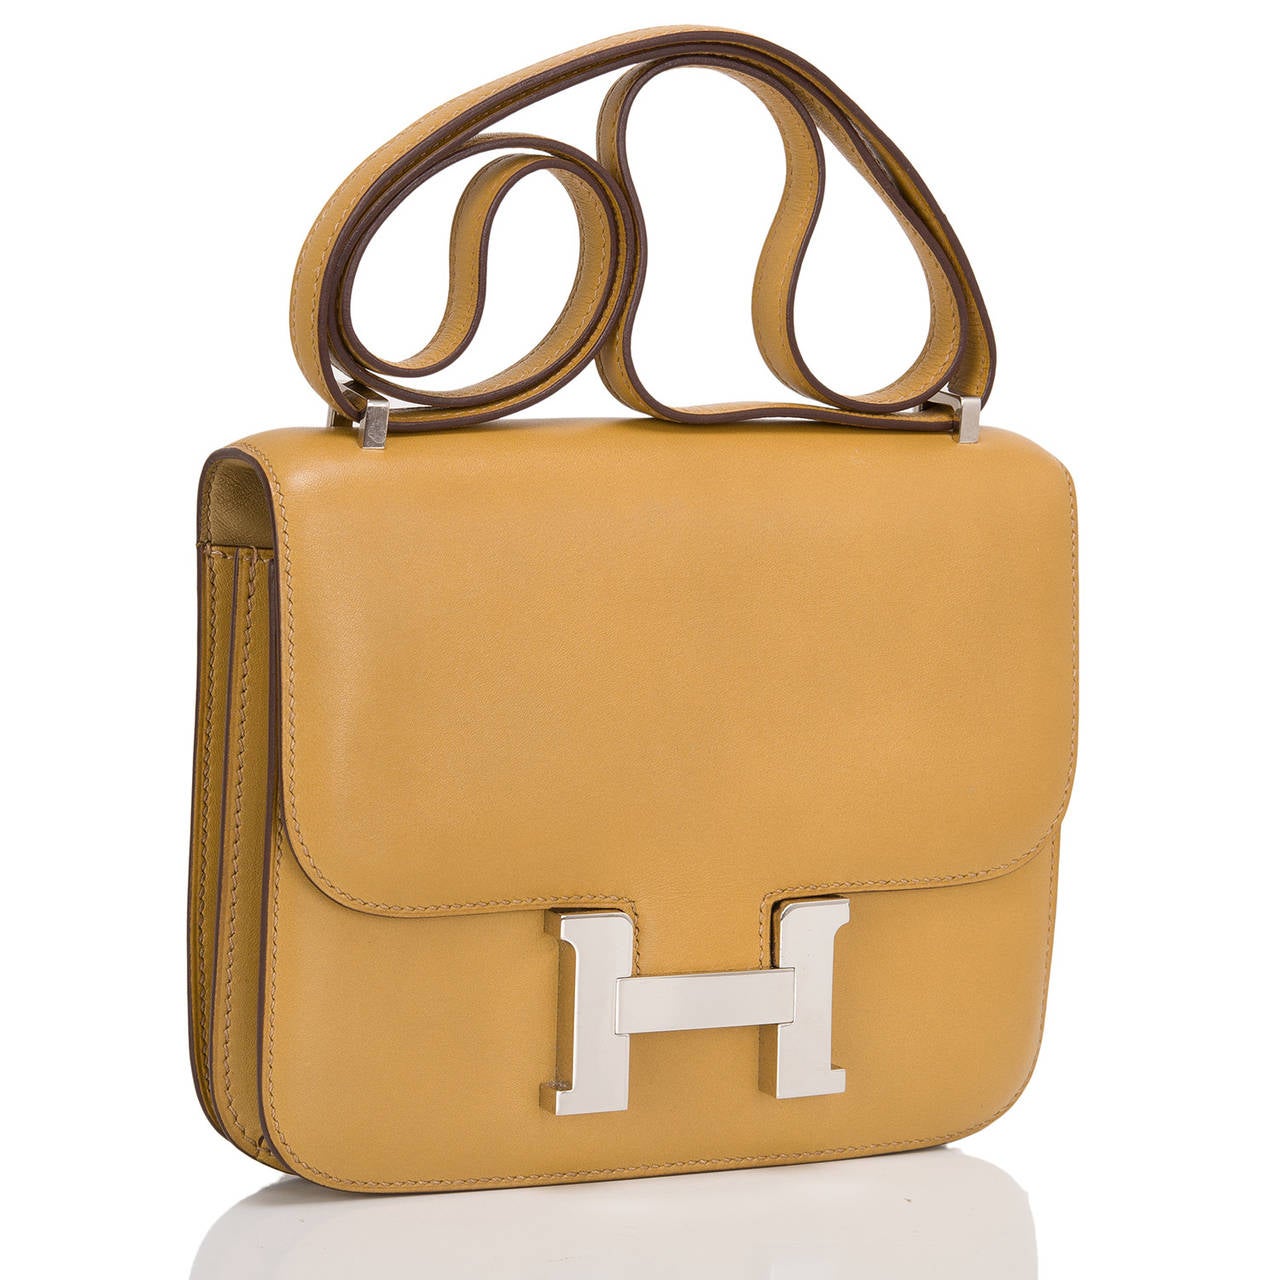 This classic Hermes Mini Constance 18cm in Poussiere Tadelakt leather with palladium hardware features tonal stitching, metal 